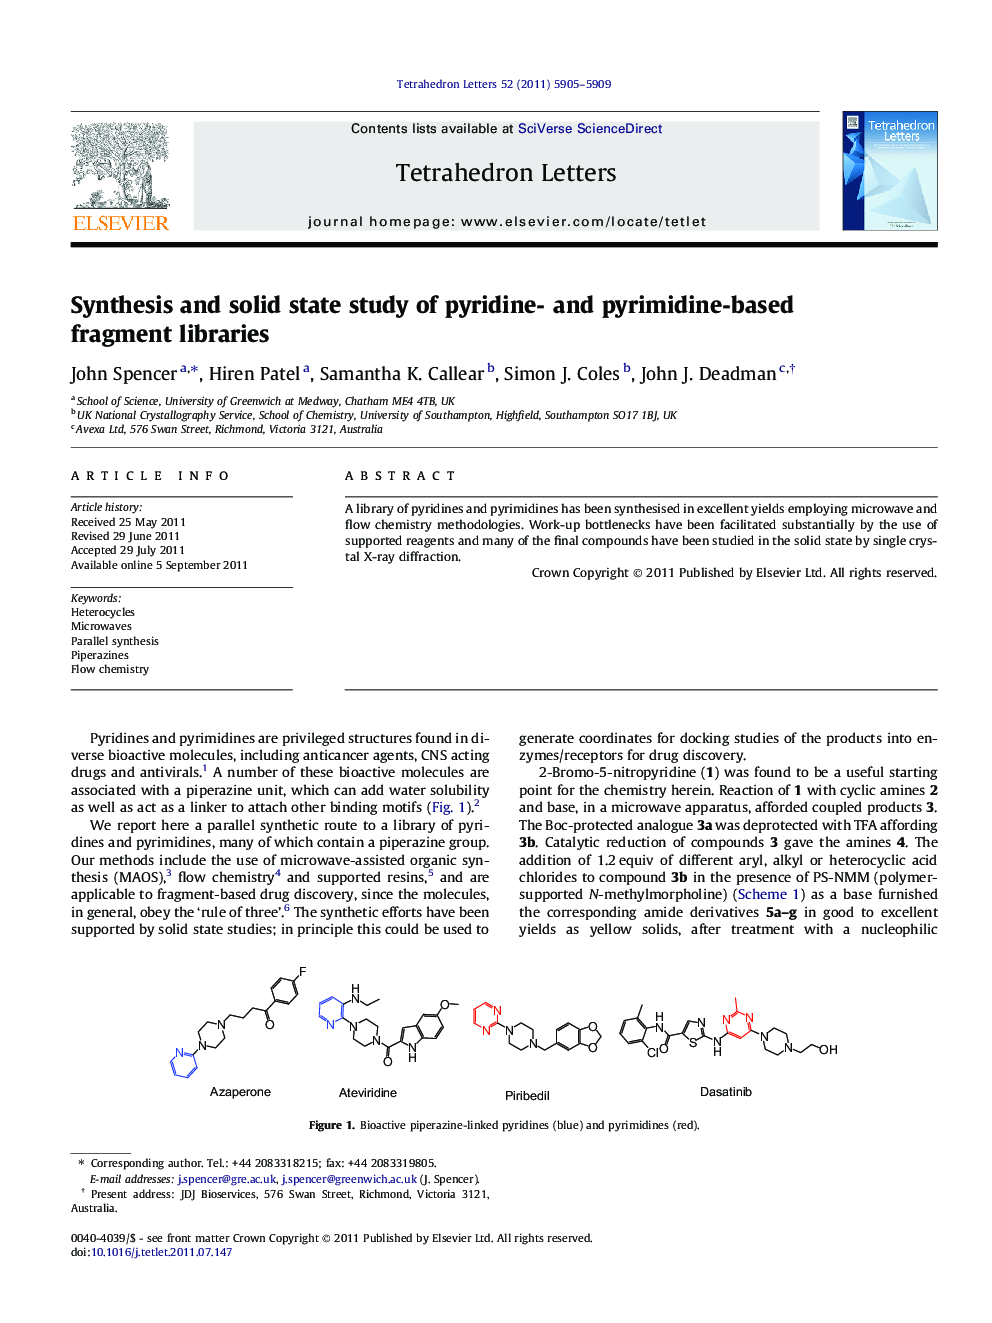 Synthesis and solid state study of pyridine- and pyrimidine-based fragment libraries